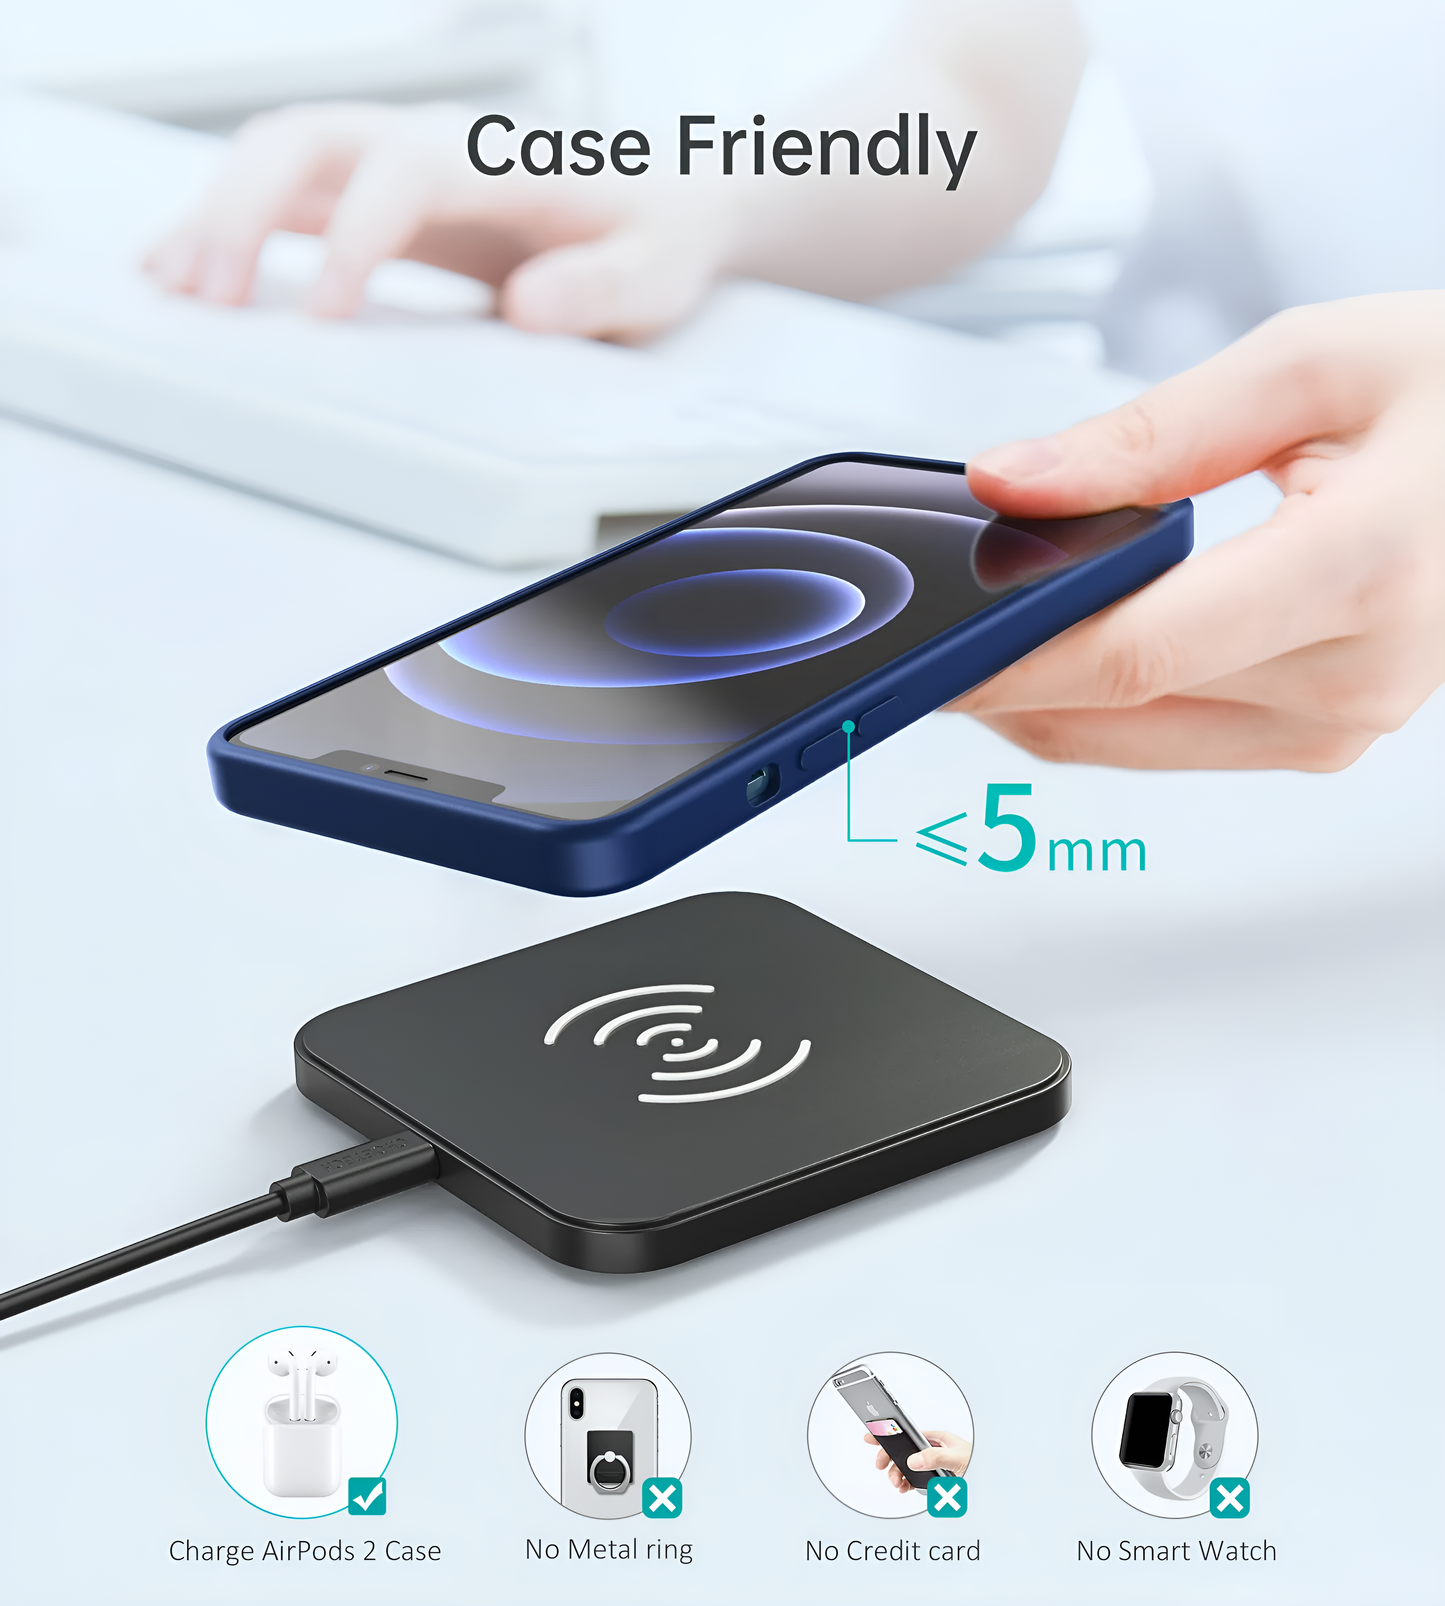 Choetech 10W Fast Wireless Charger for Qi Wireless charging Supported Mobiles, T511-S by jcbl accessories. Case friendly, 5MM,— Charge AirPods 2 Case No Metal ring No Credit card No Smart Watch